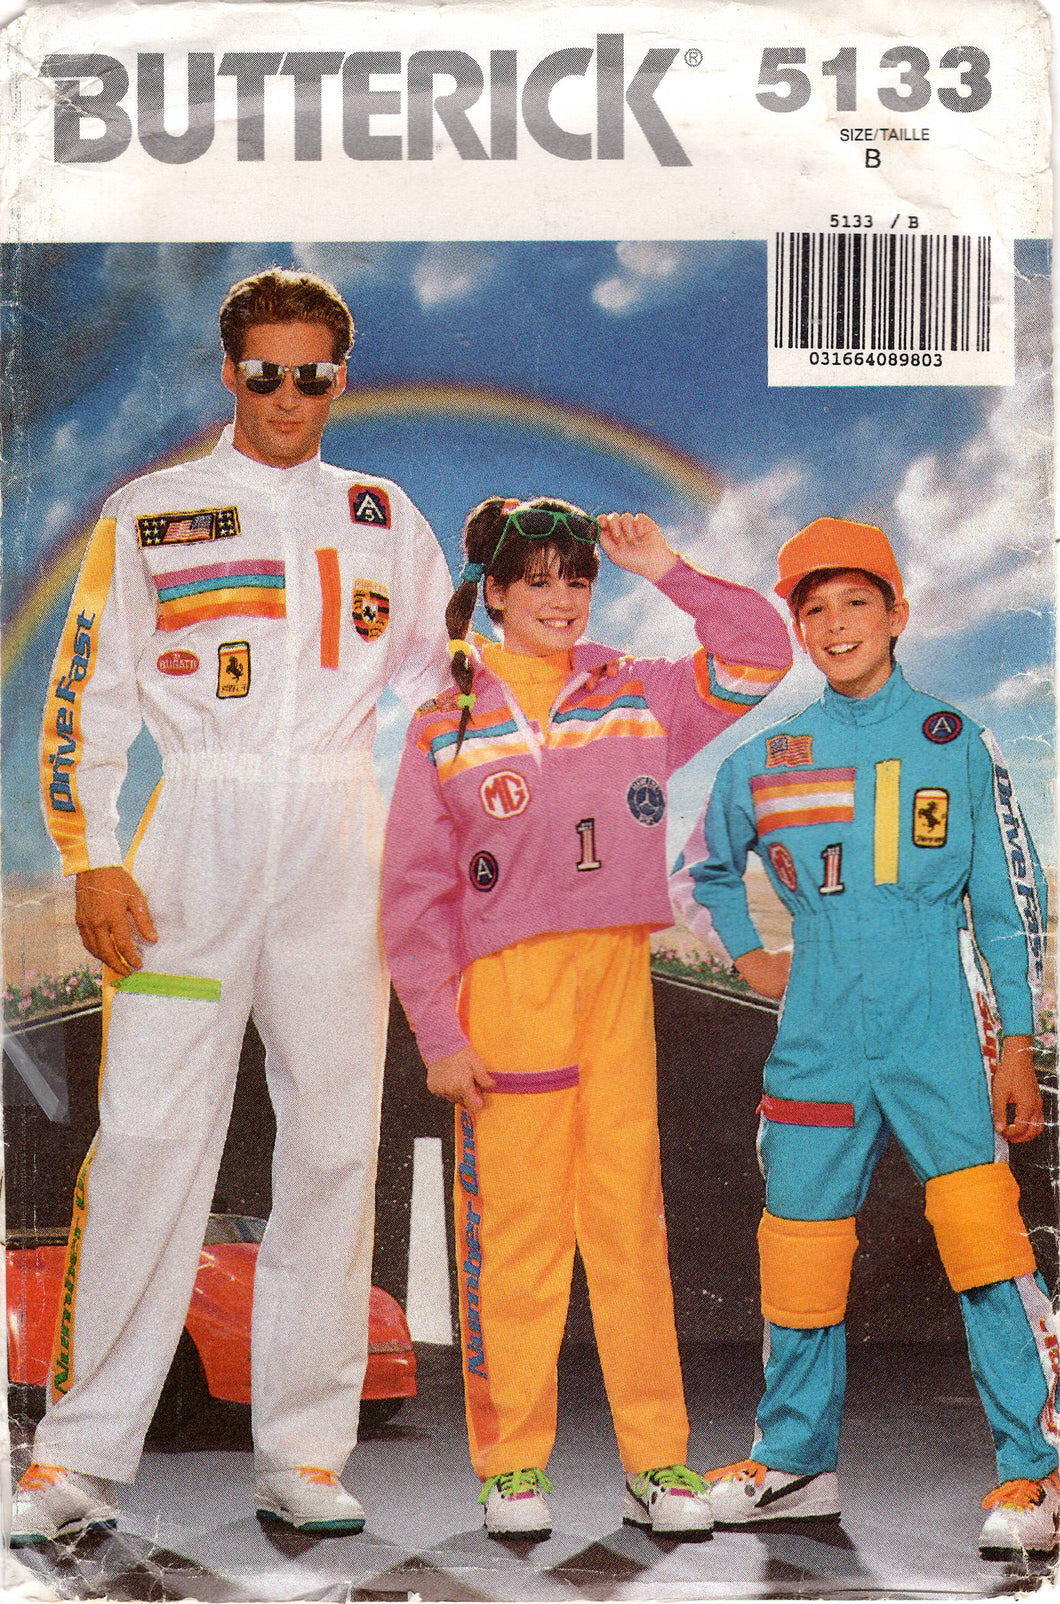 1990's Butterick Very Easy Child's Racing Costume with Jumpsuit and Jacket - Size 7-14 - No. 5133